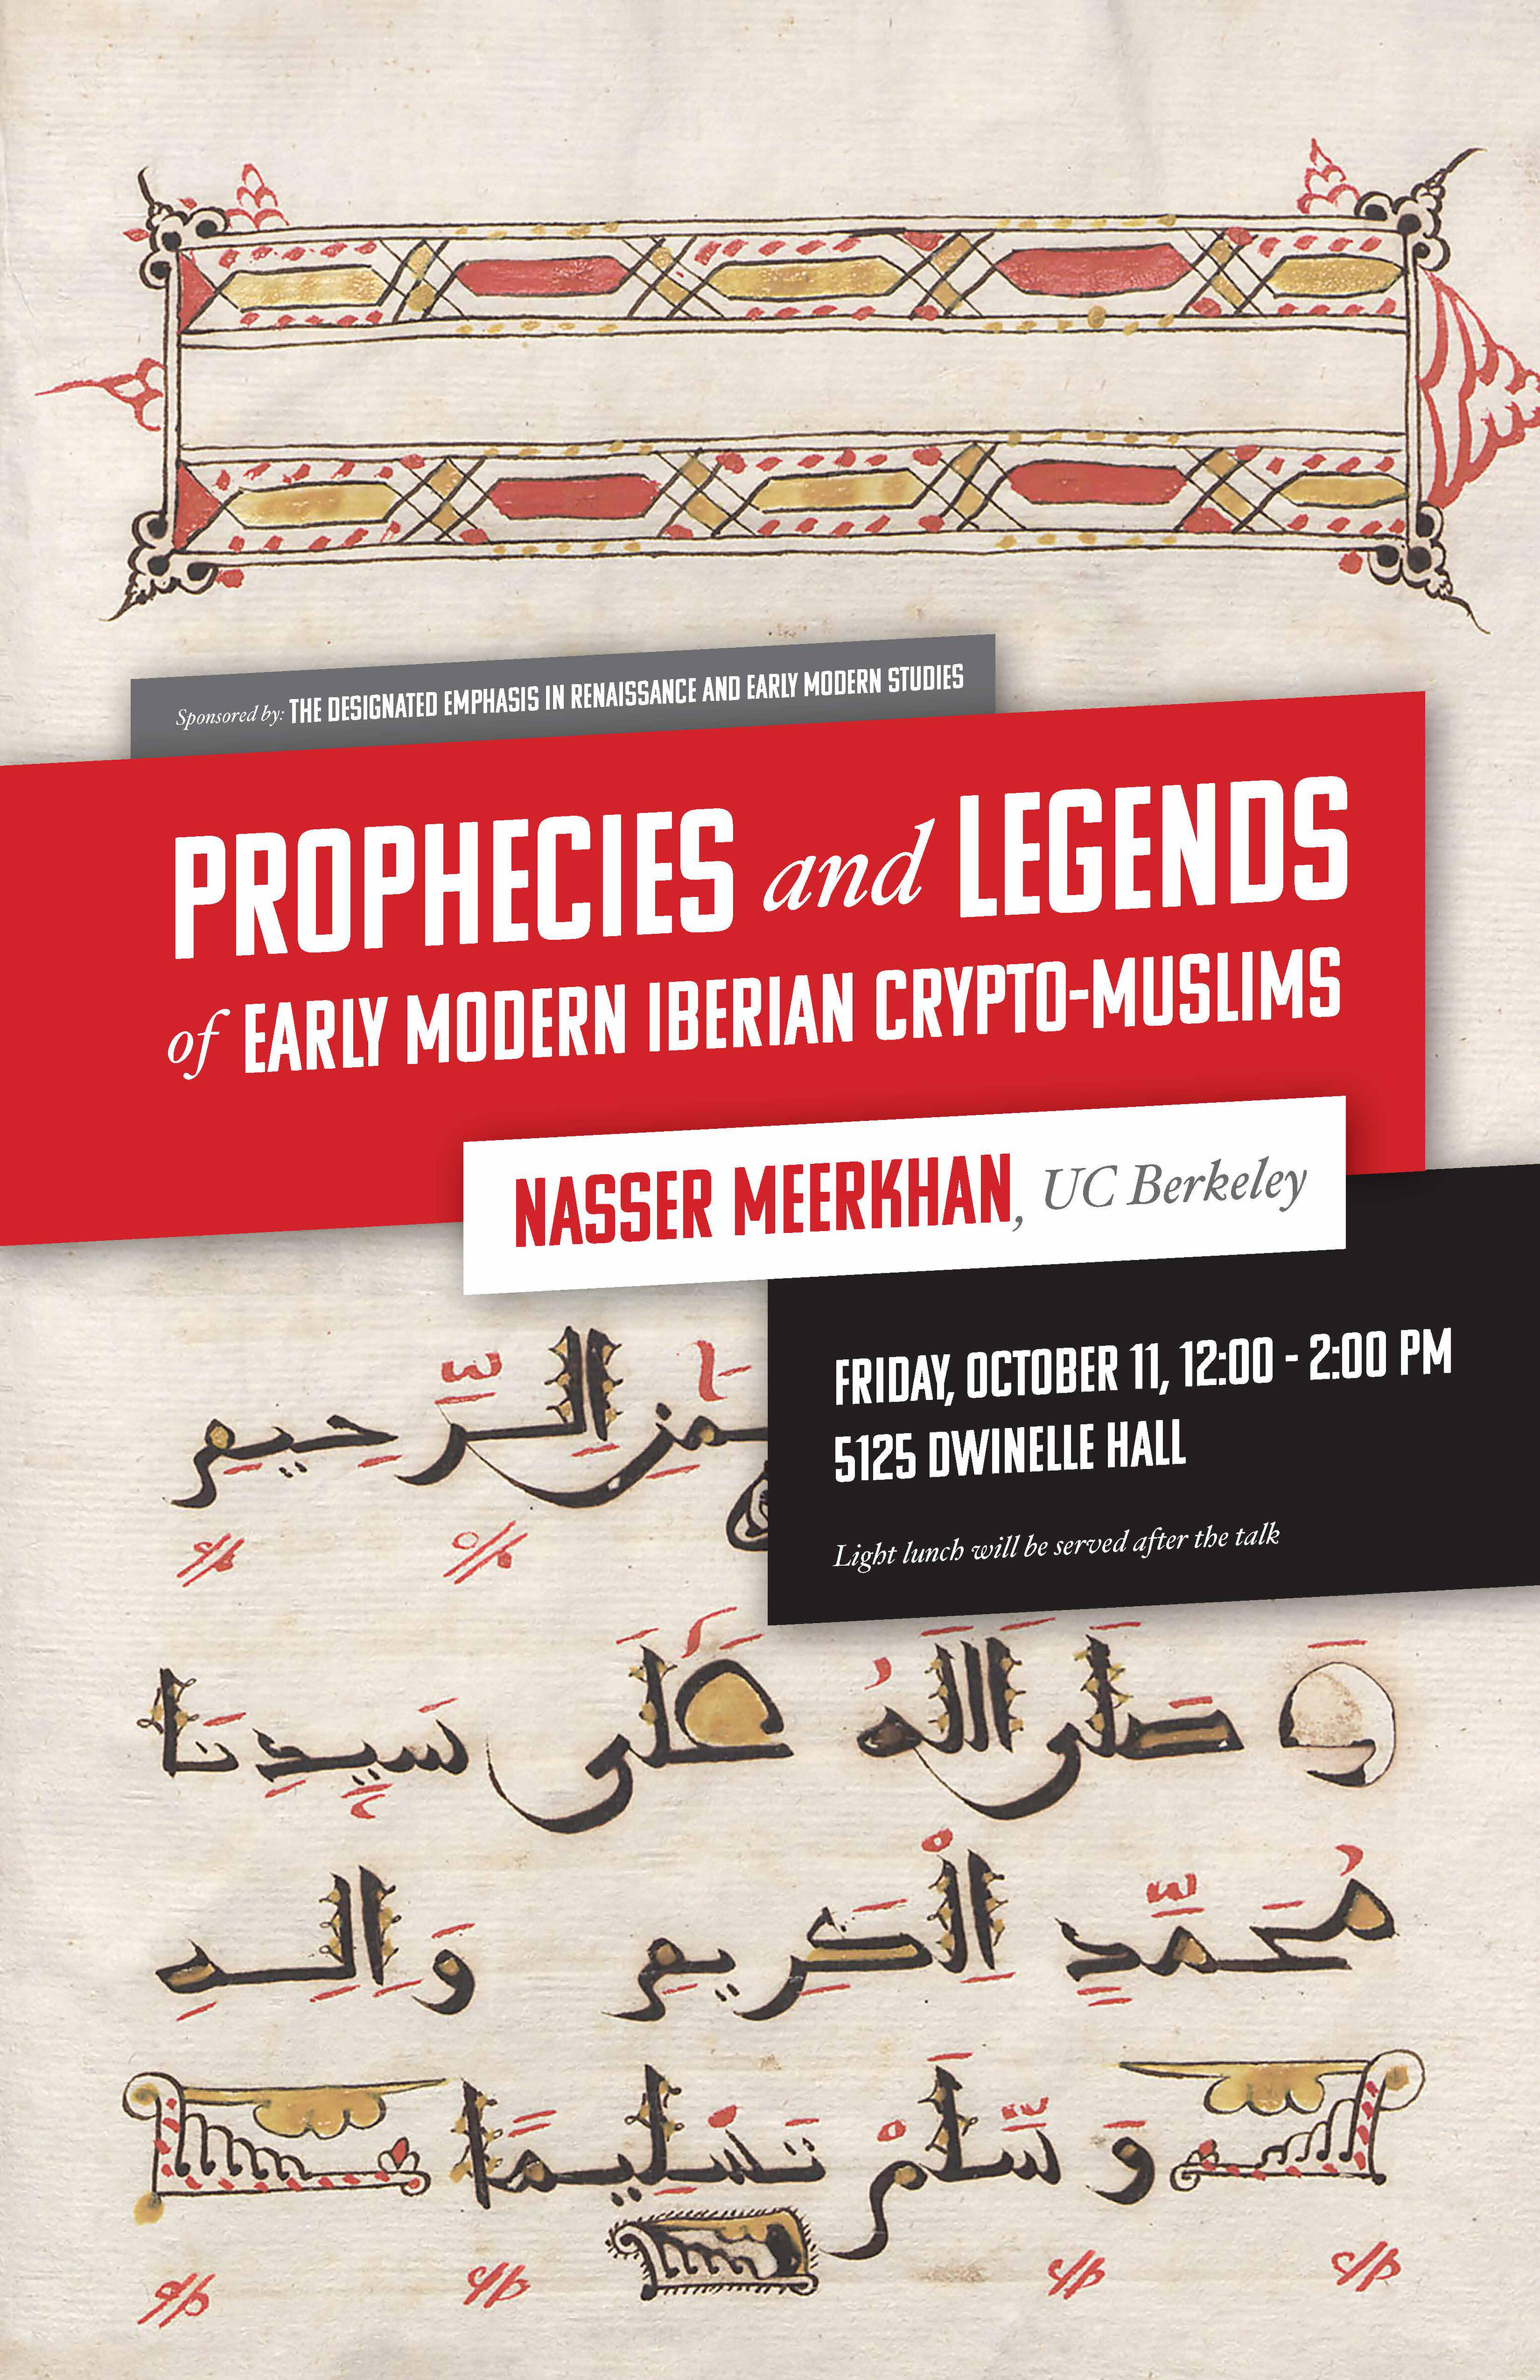 Prophecies and Legends of Early Modern Iberian Crypto-Muslims, Prof. Nasser Meerkhan